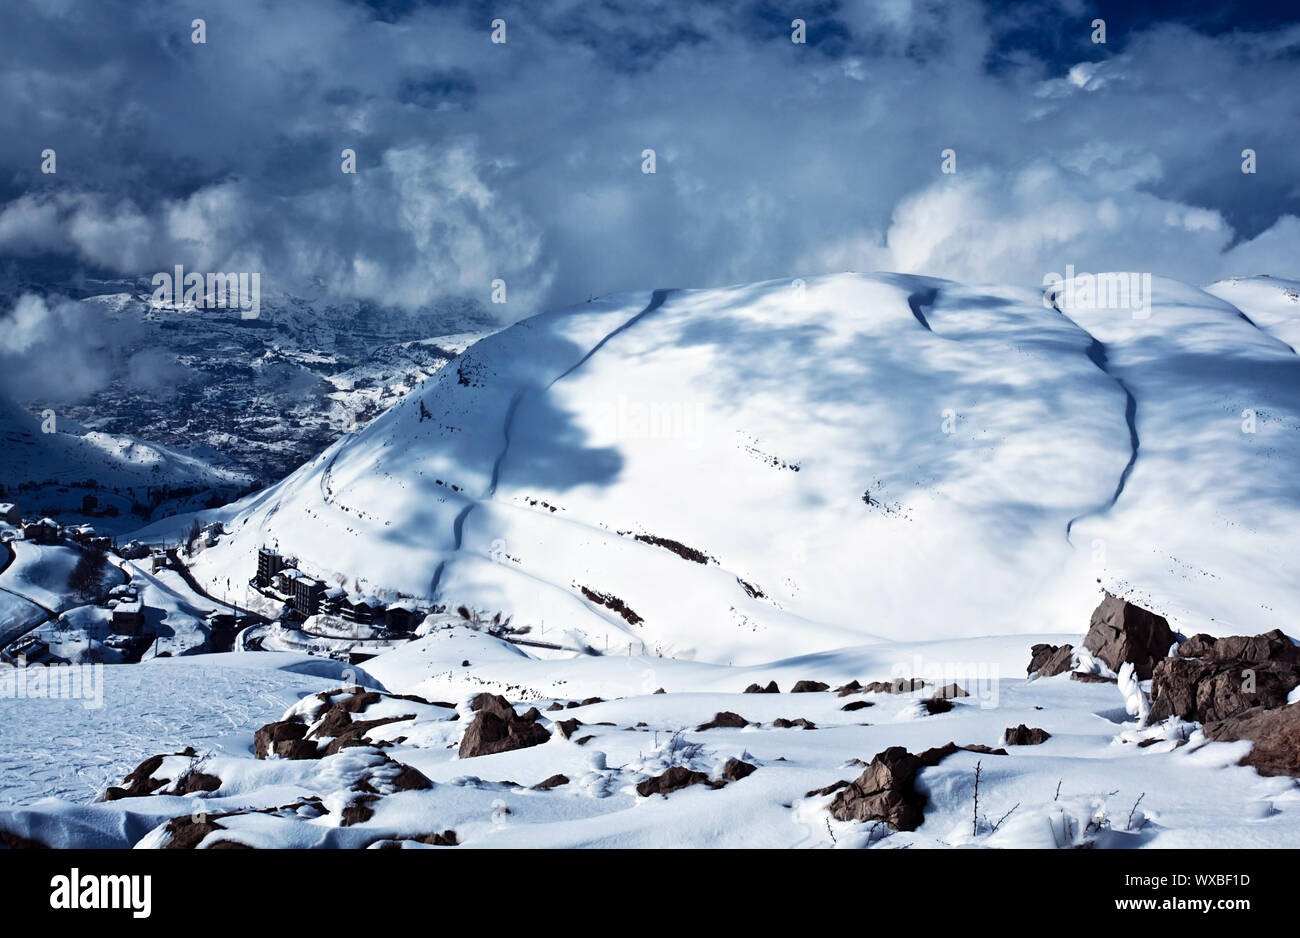 Image of Faraya mountains covered snow, small country houses located on snowy hill, luxury ski resort, seasonal travel, january frosty weather, snowin Stock Photo